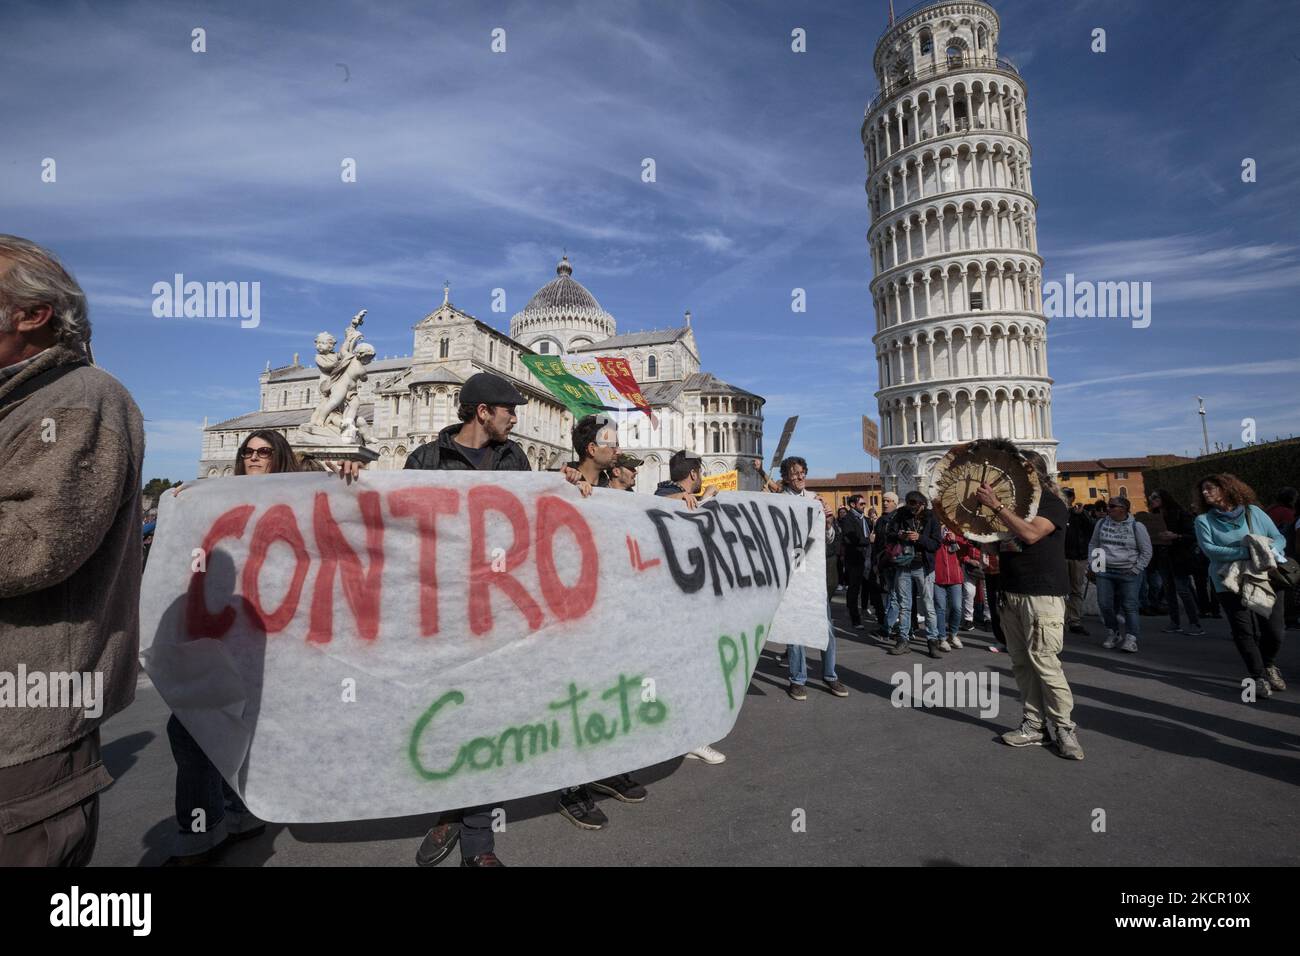 Opponents of Italy's Green pass gathered in Miracle Square during the visit of President Sergio Mattarella in Pisa, Italy, on October 18, 2021. While president Sergio Mattarella visited Pisa for the academic year inauguration of the University of Pisa approximately two hundred anti-vaccine activists gathered under the famous leaning tower to contest the Green Pass, the Italian health pass that requires workers to have government-issued proof of vaccination. Protests from the anti-vax sparked around the country’s major cities. (Photo by Enrico Mattia Del Punta/NurPhoto) Stock Photo